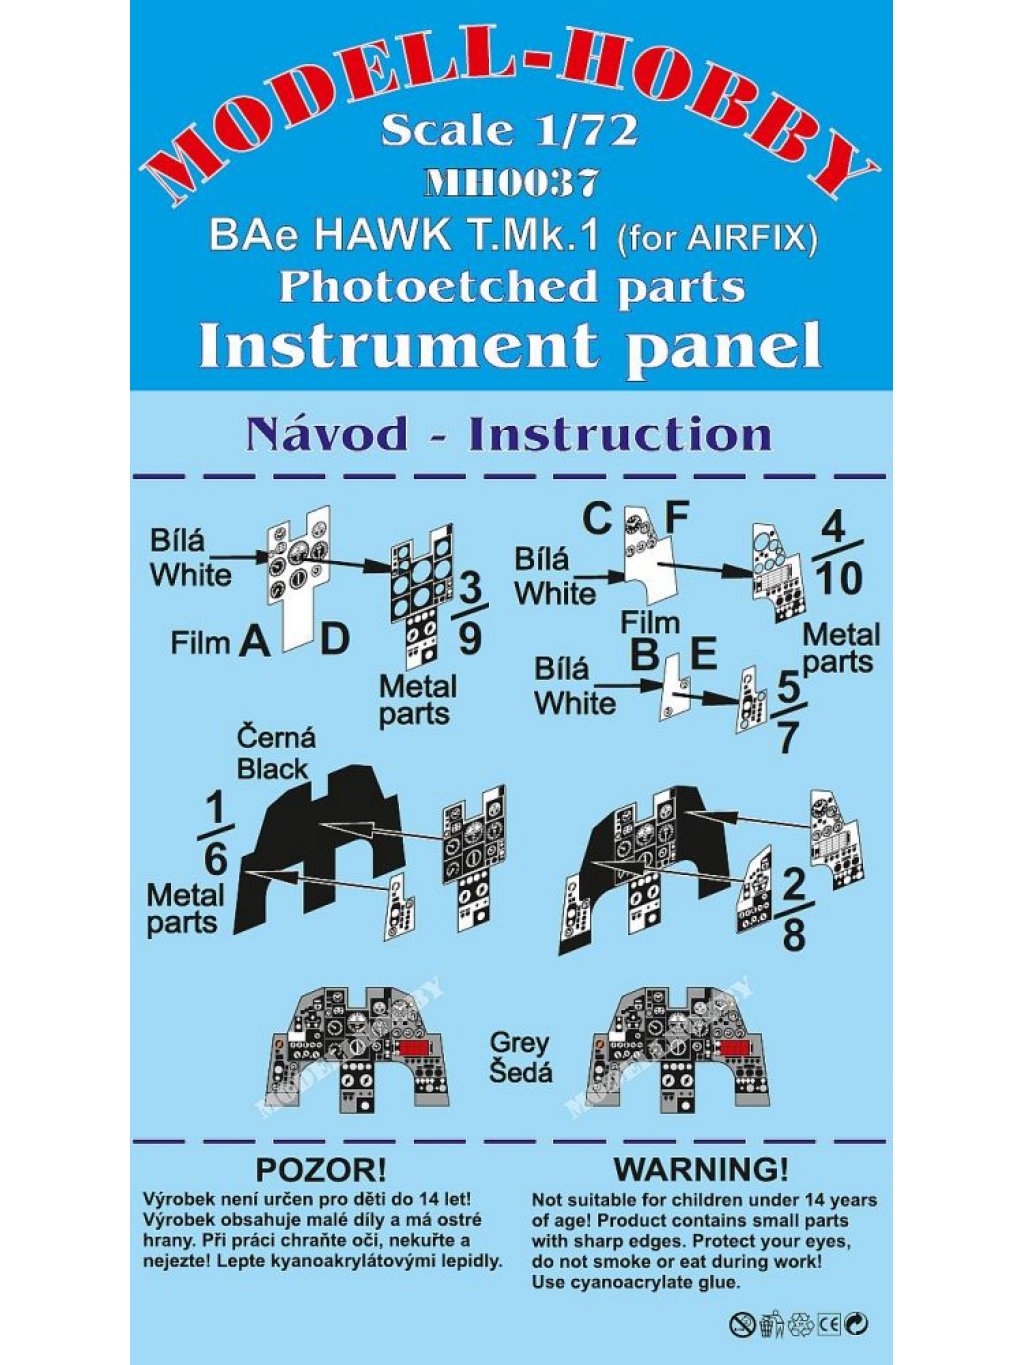 BAE Hawk T.1 Photoetched parts instrument panel for Airfix ex Modell-Hobby